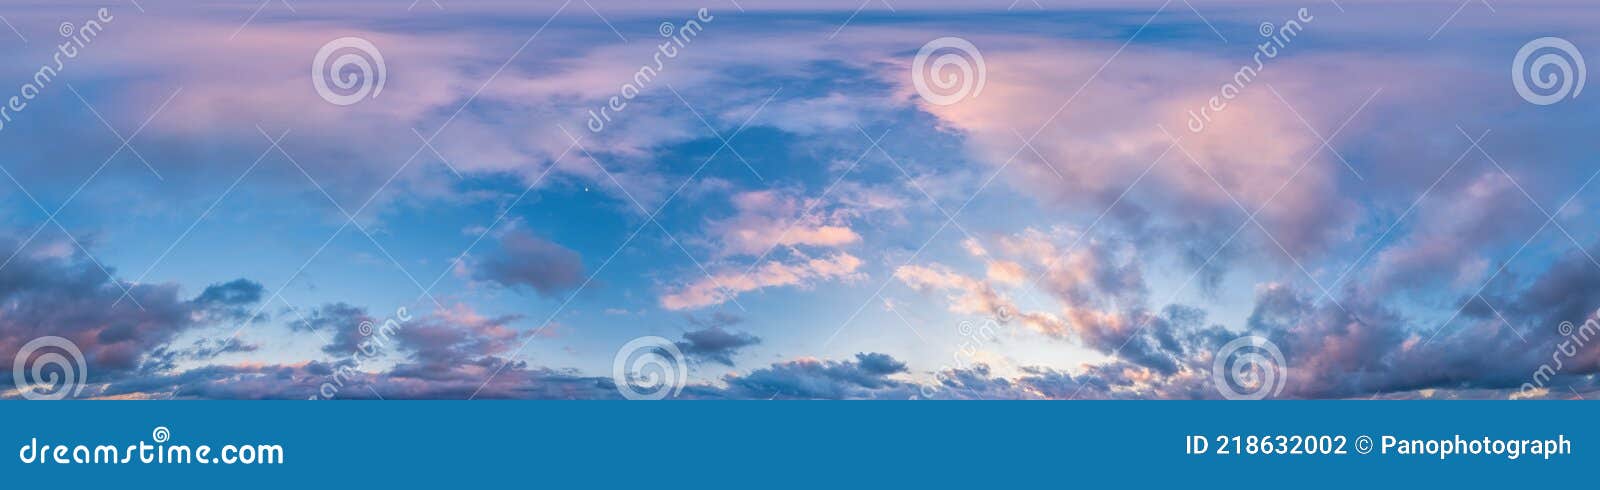 dark blue sunset sky pano with cumulus clouds. seamless hdr panorama in spherical equirectangular format. complete